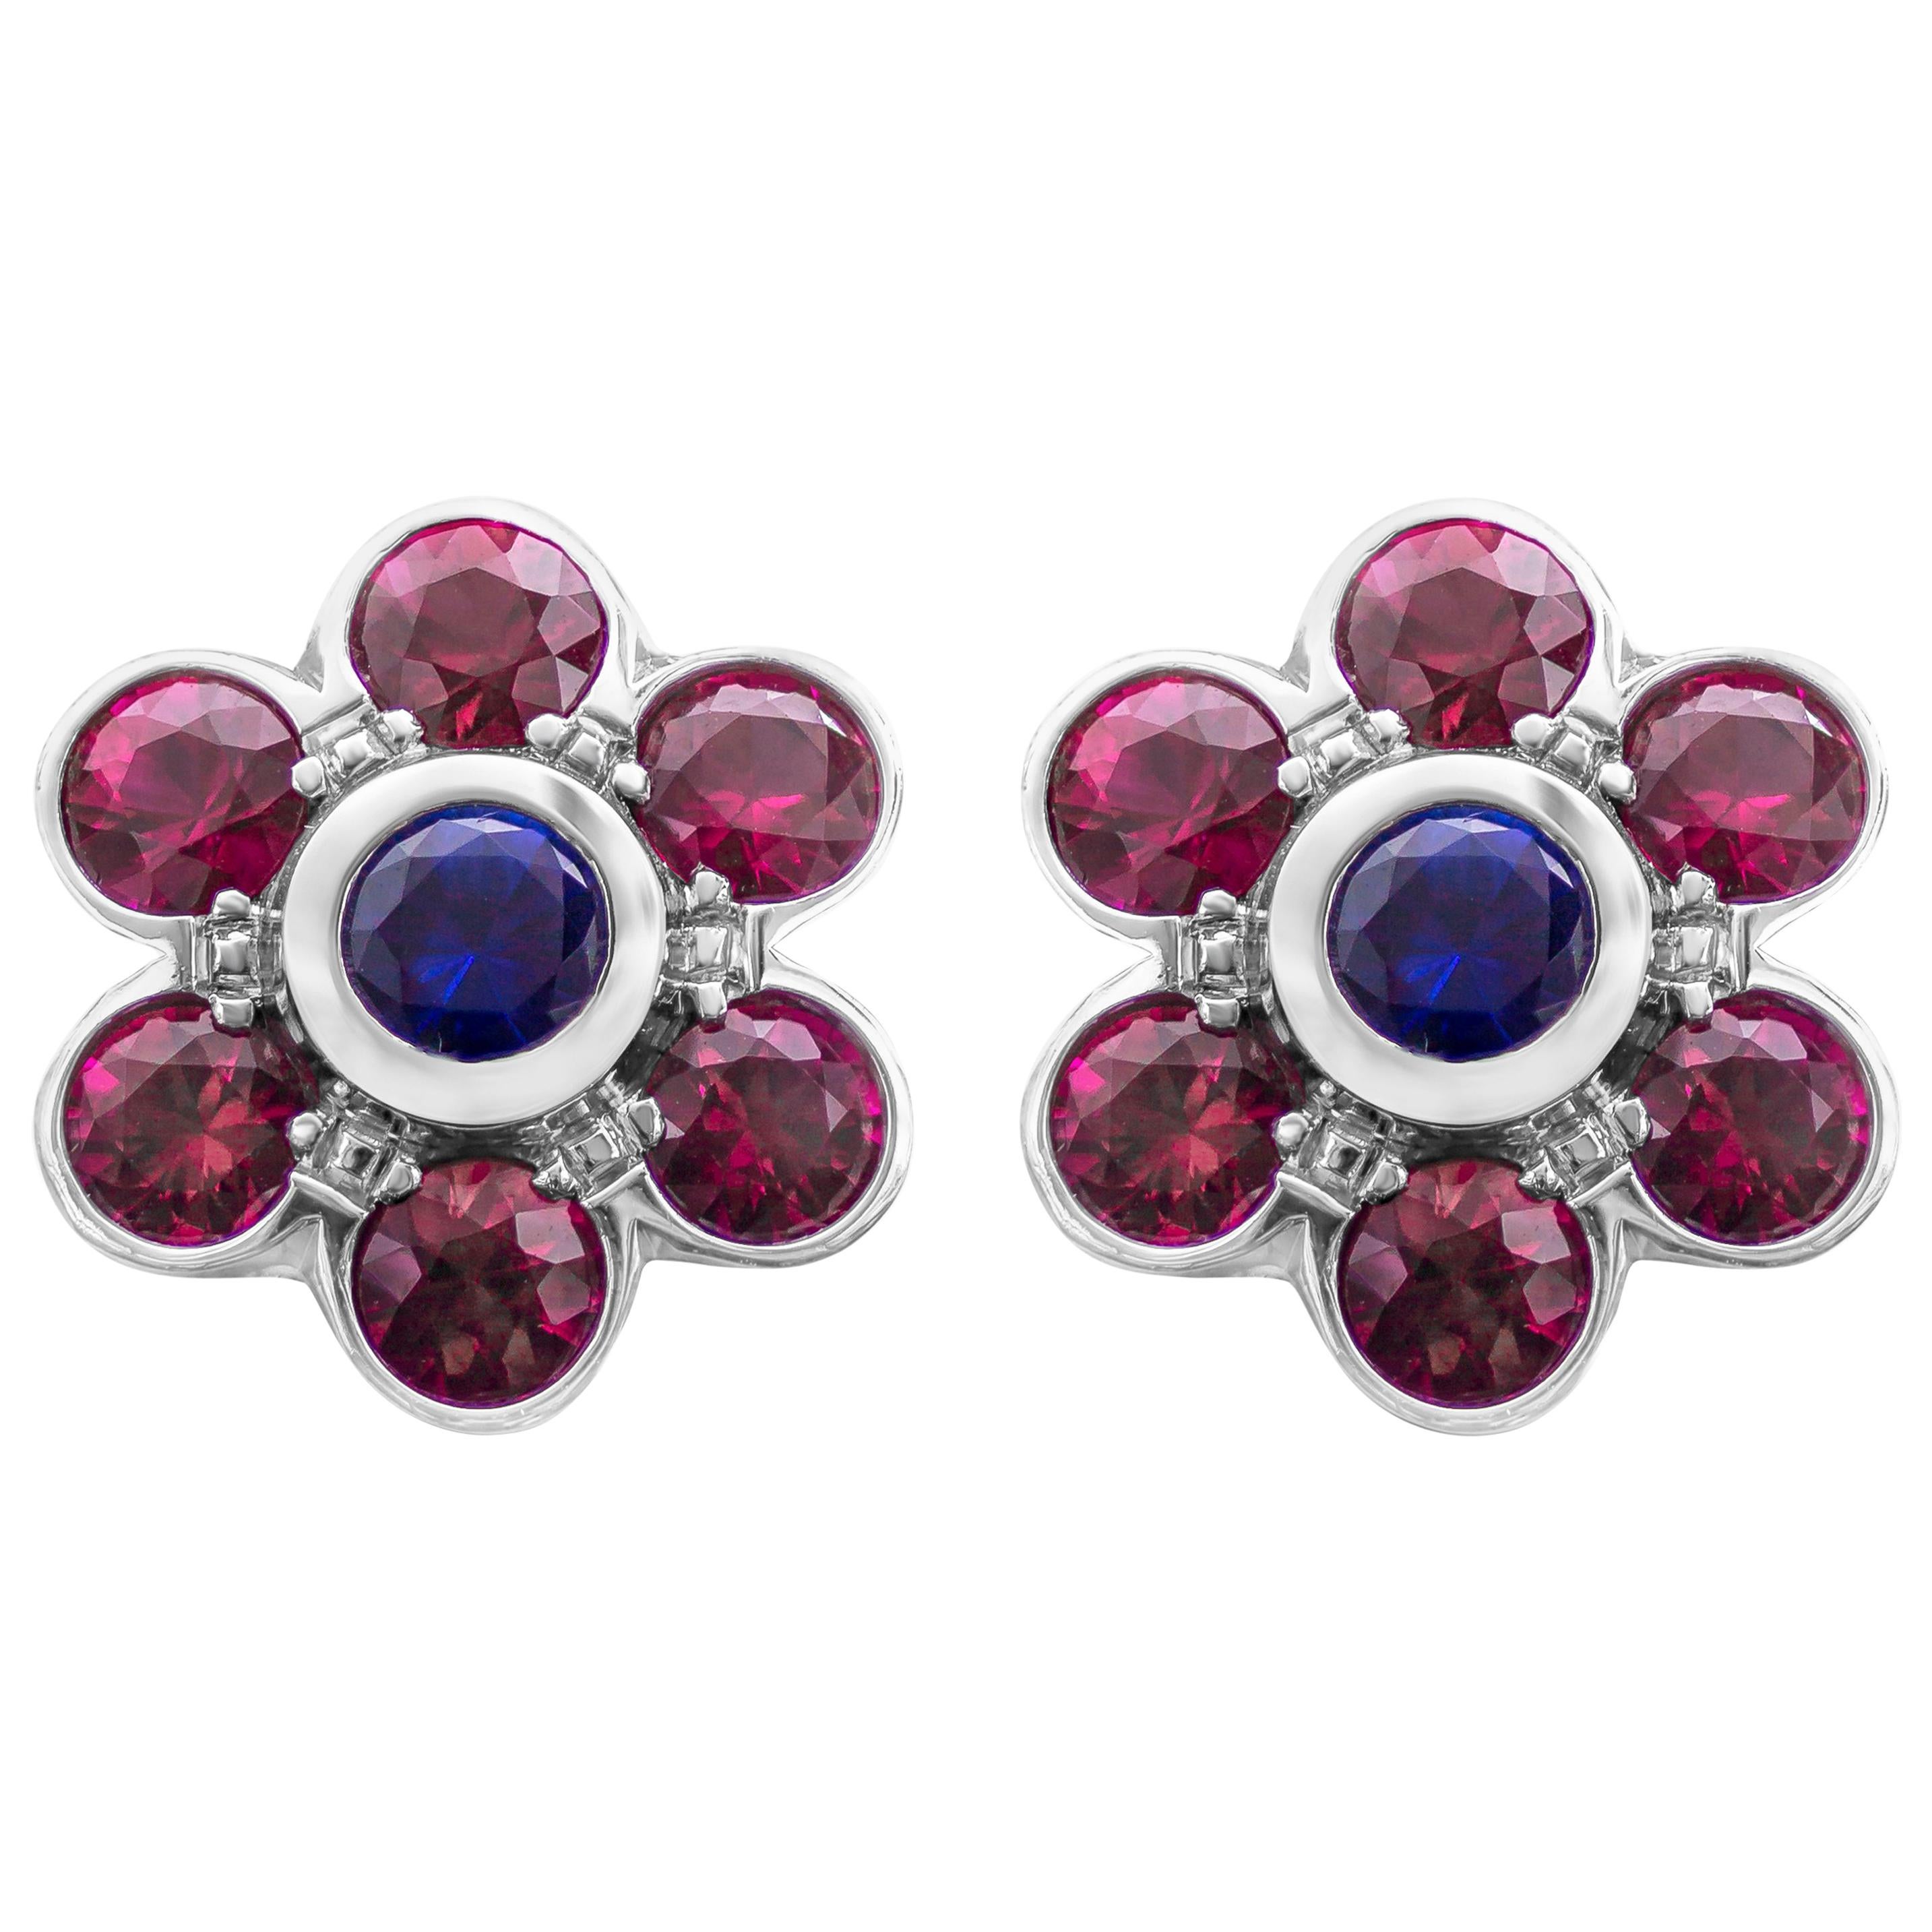 3.07 Carats Total Brilliant Round Cut Ruby and Sapphire Flower Stud Earrings For Sale